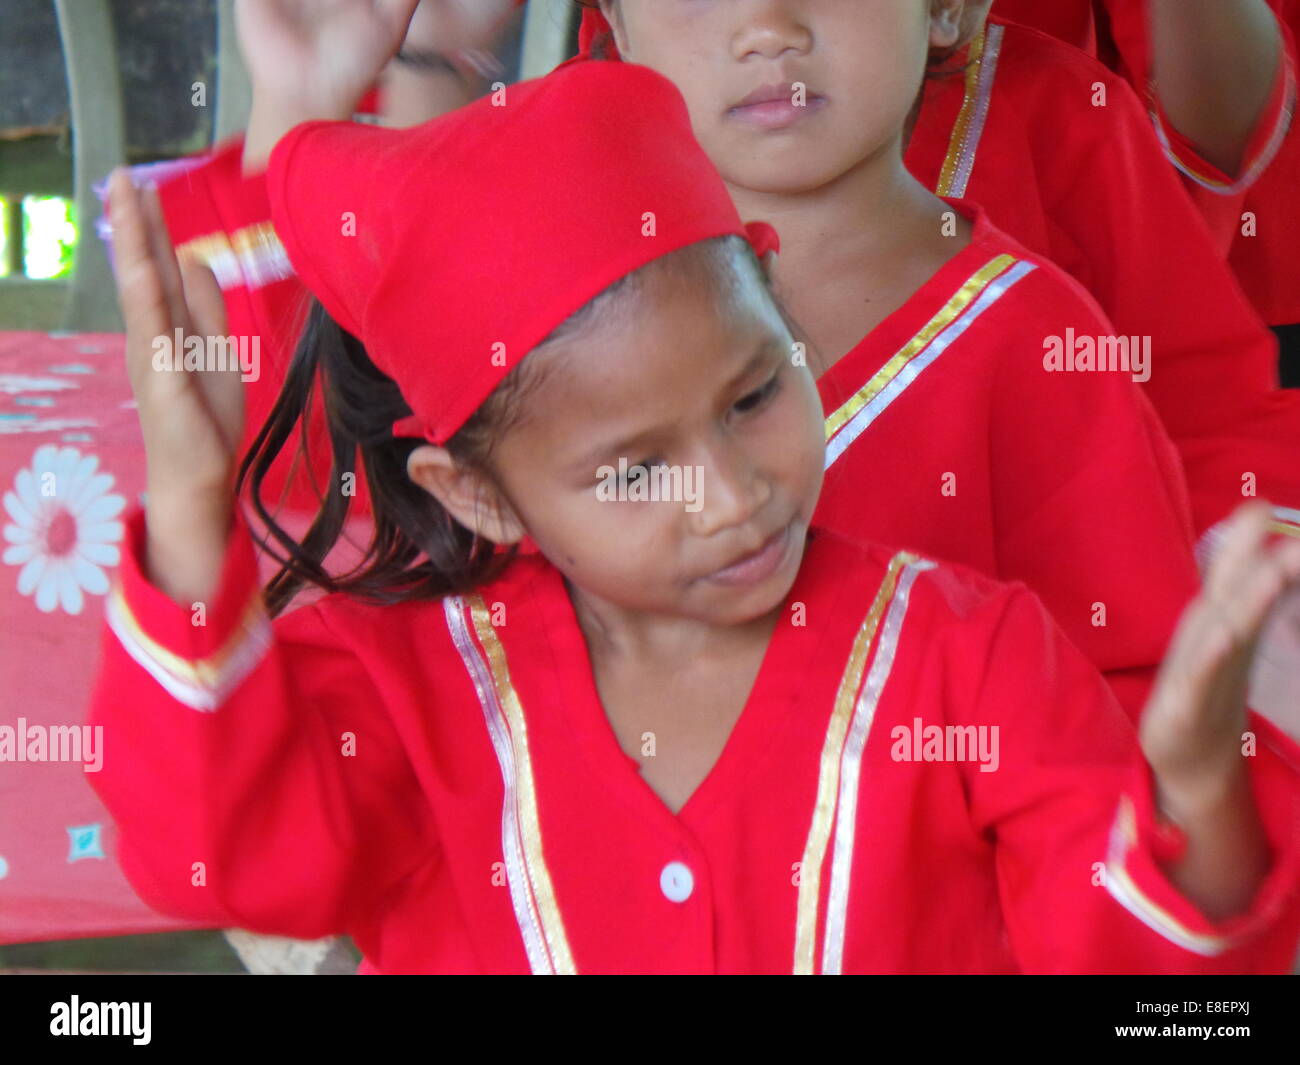 Young kids performing different Subanen dances. Subanen is one of the endangered tribes in Mindanao. Dumingag town in Zamboanga del Sur province in the island of Mindanao is adhering in preserving the cultures and traditions of their town, as a matter of fact during town fiestas, pop dance are prohibited and traditional songs and dances are promoted to alleviate their cultural pride. © Sherbien Dacalanio/Pacific Press/Alamy Live News Stock Photo